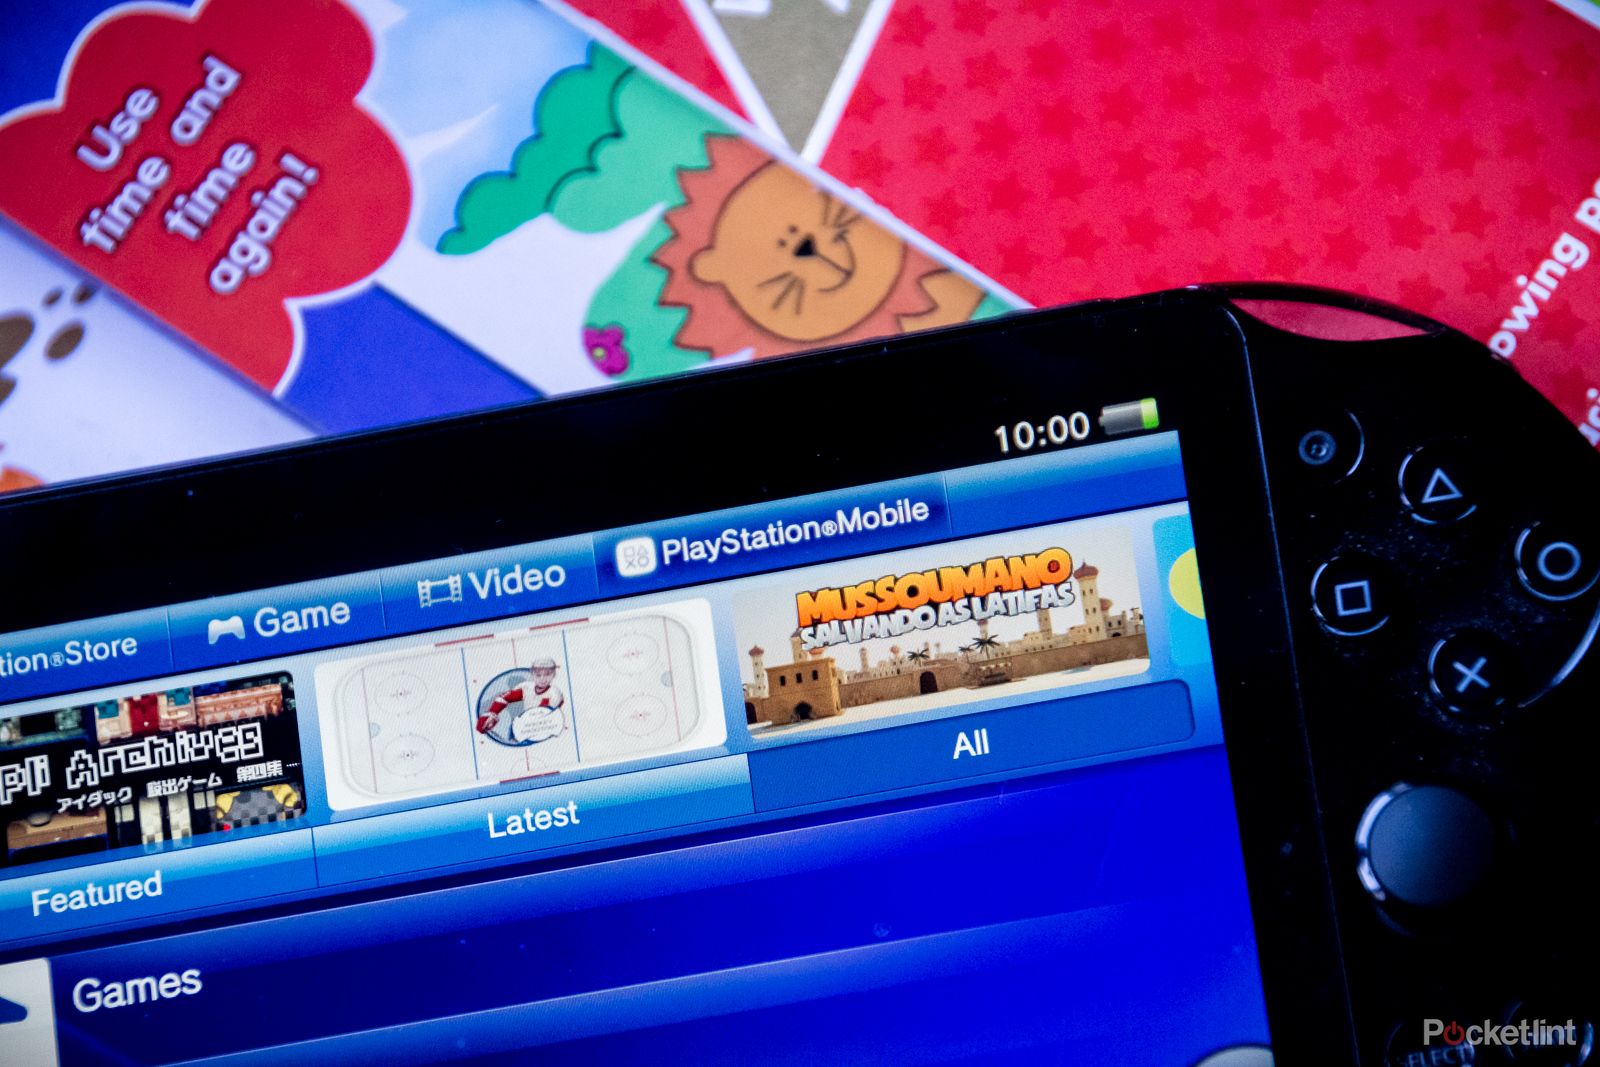 download your playstation mobile games now because you will soon lose them entirely image 1